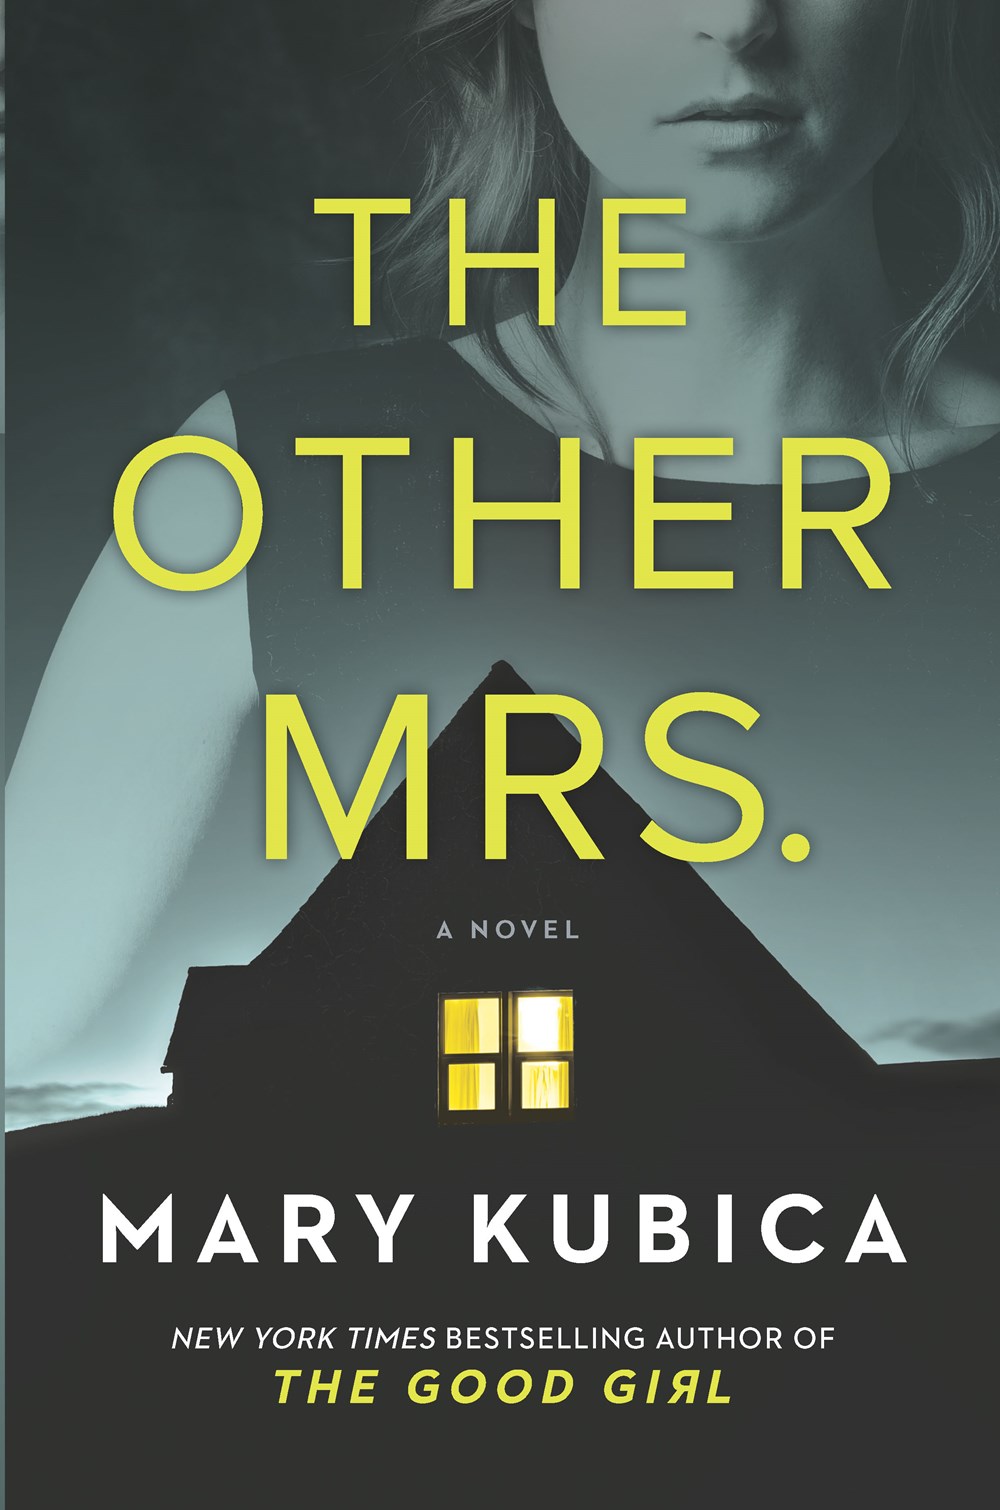 Review: The Other Mrs. by Mary Kubica